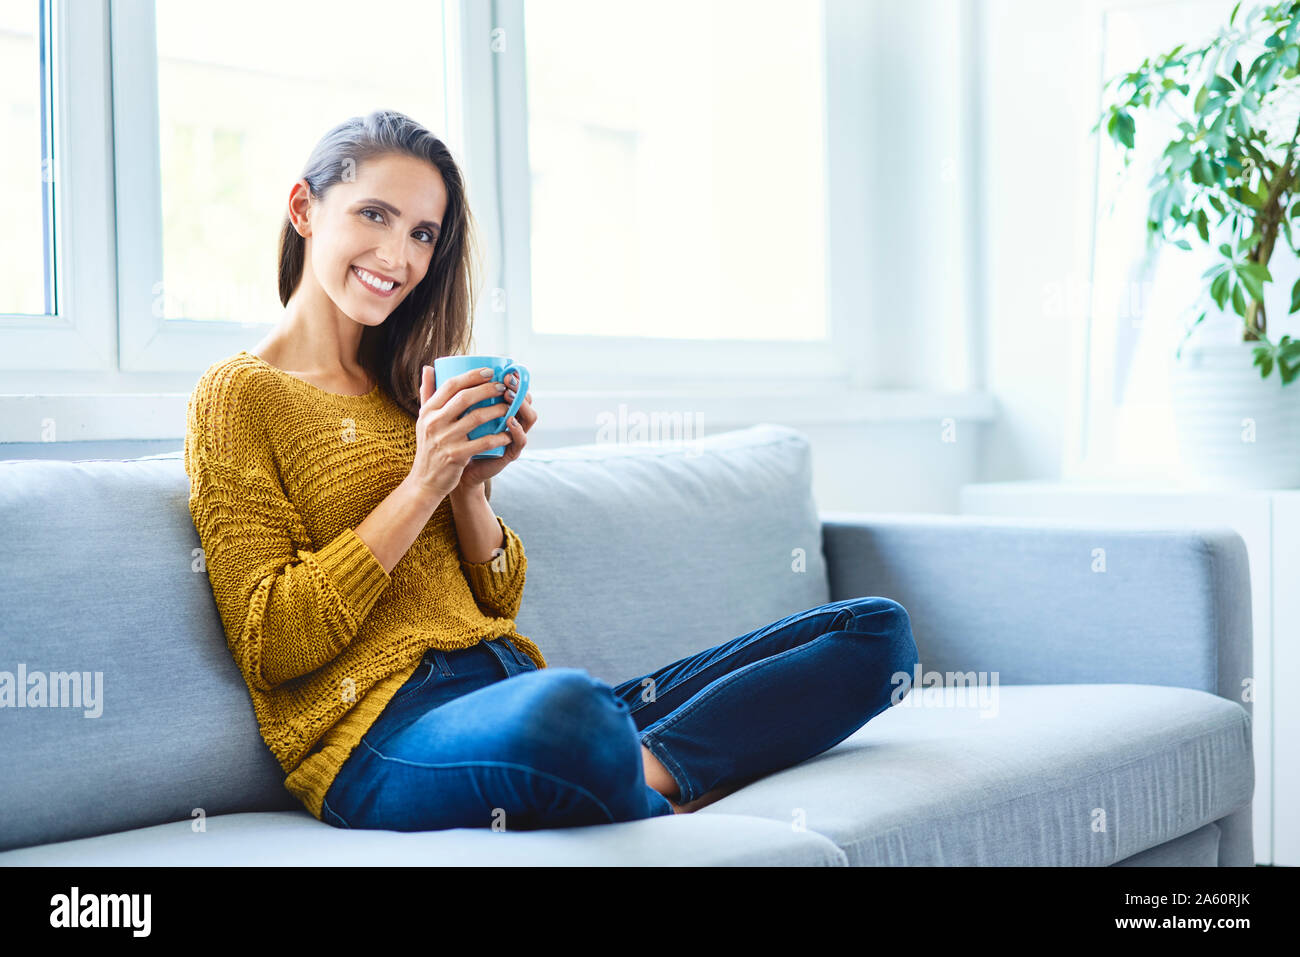 Beautiful young woman sitting on sofa drinking coffee and looking at camera Stock Photo